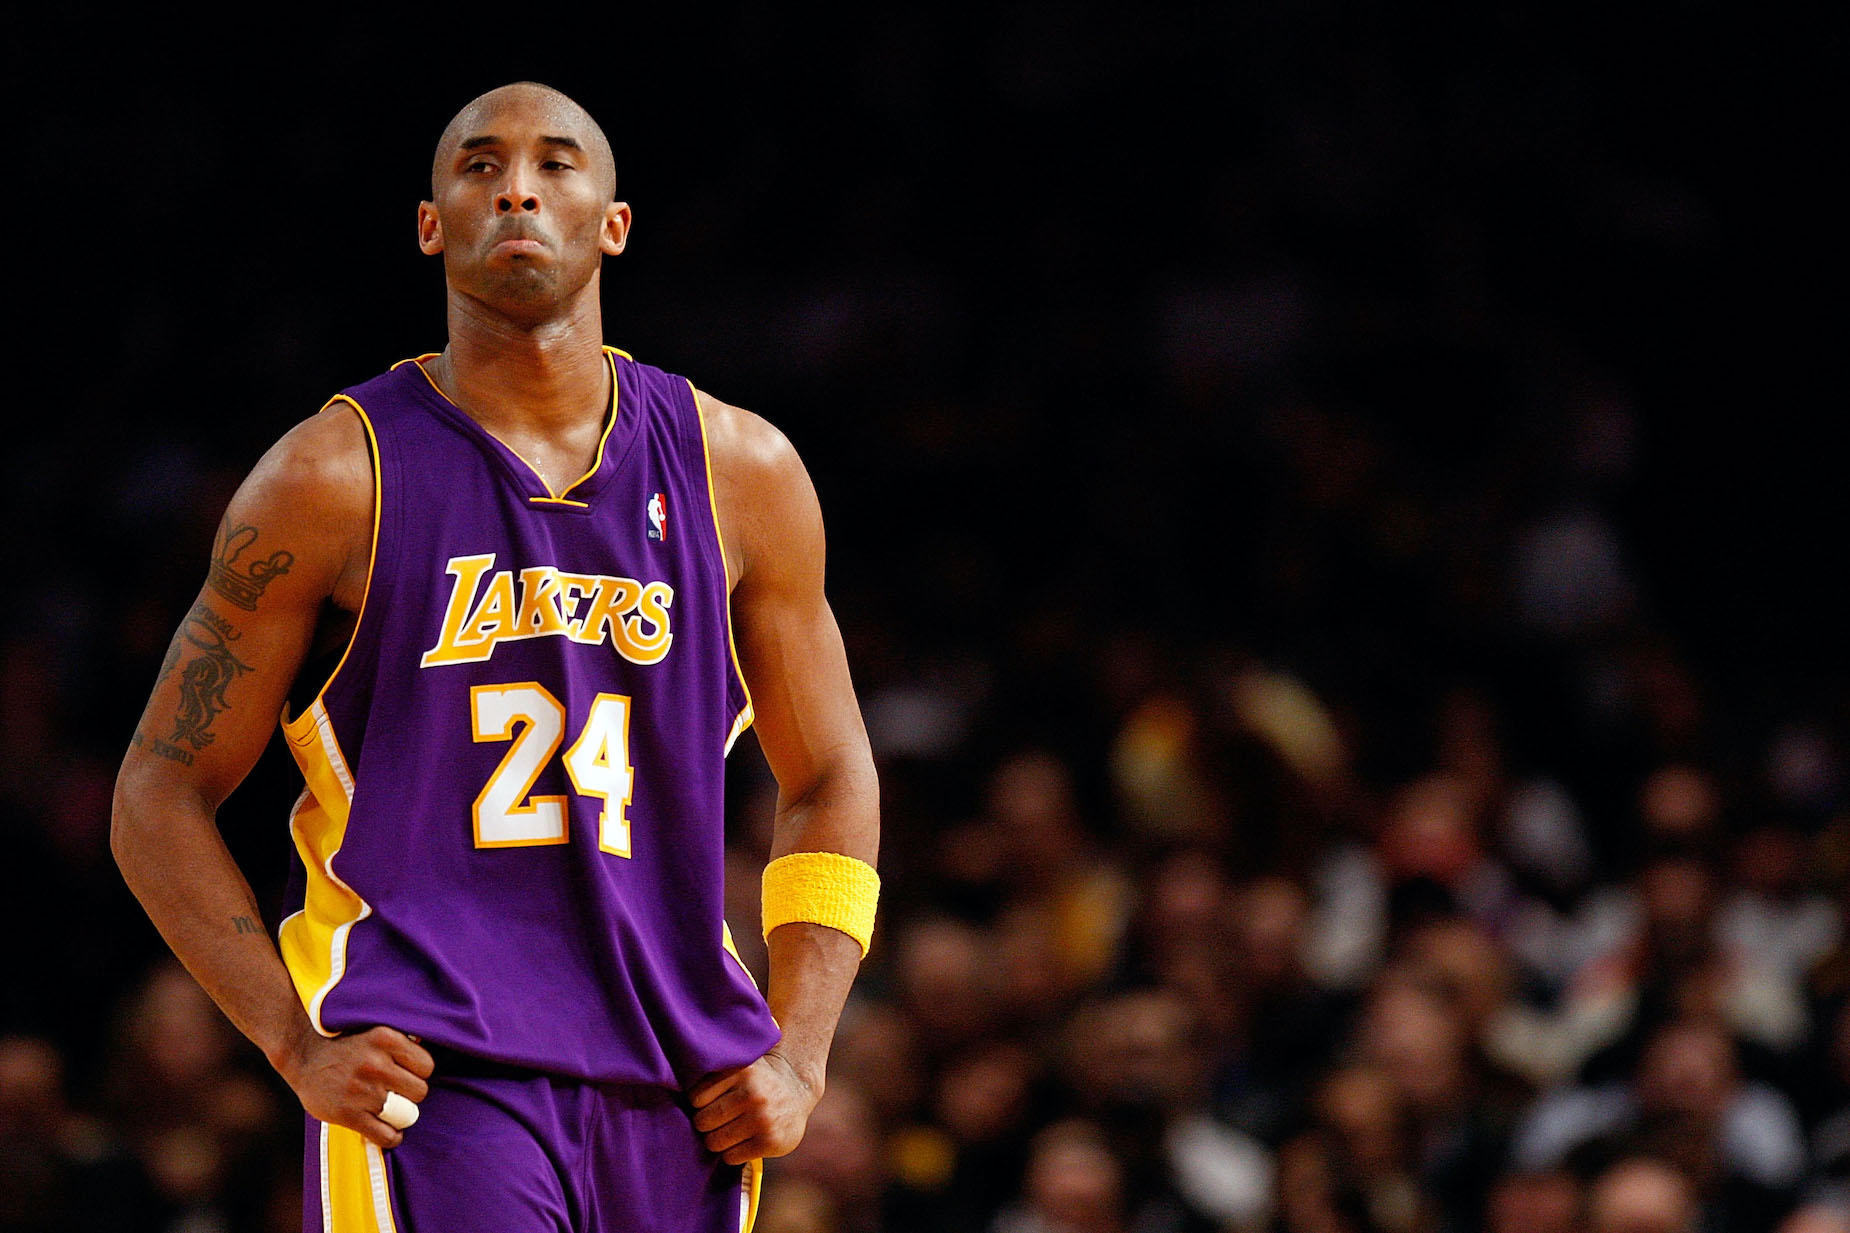 LA Lakers star Kobe Bryant reacts on the court during a 2009 NBA game.